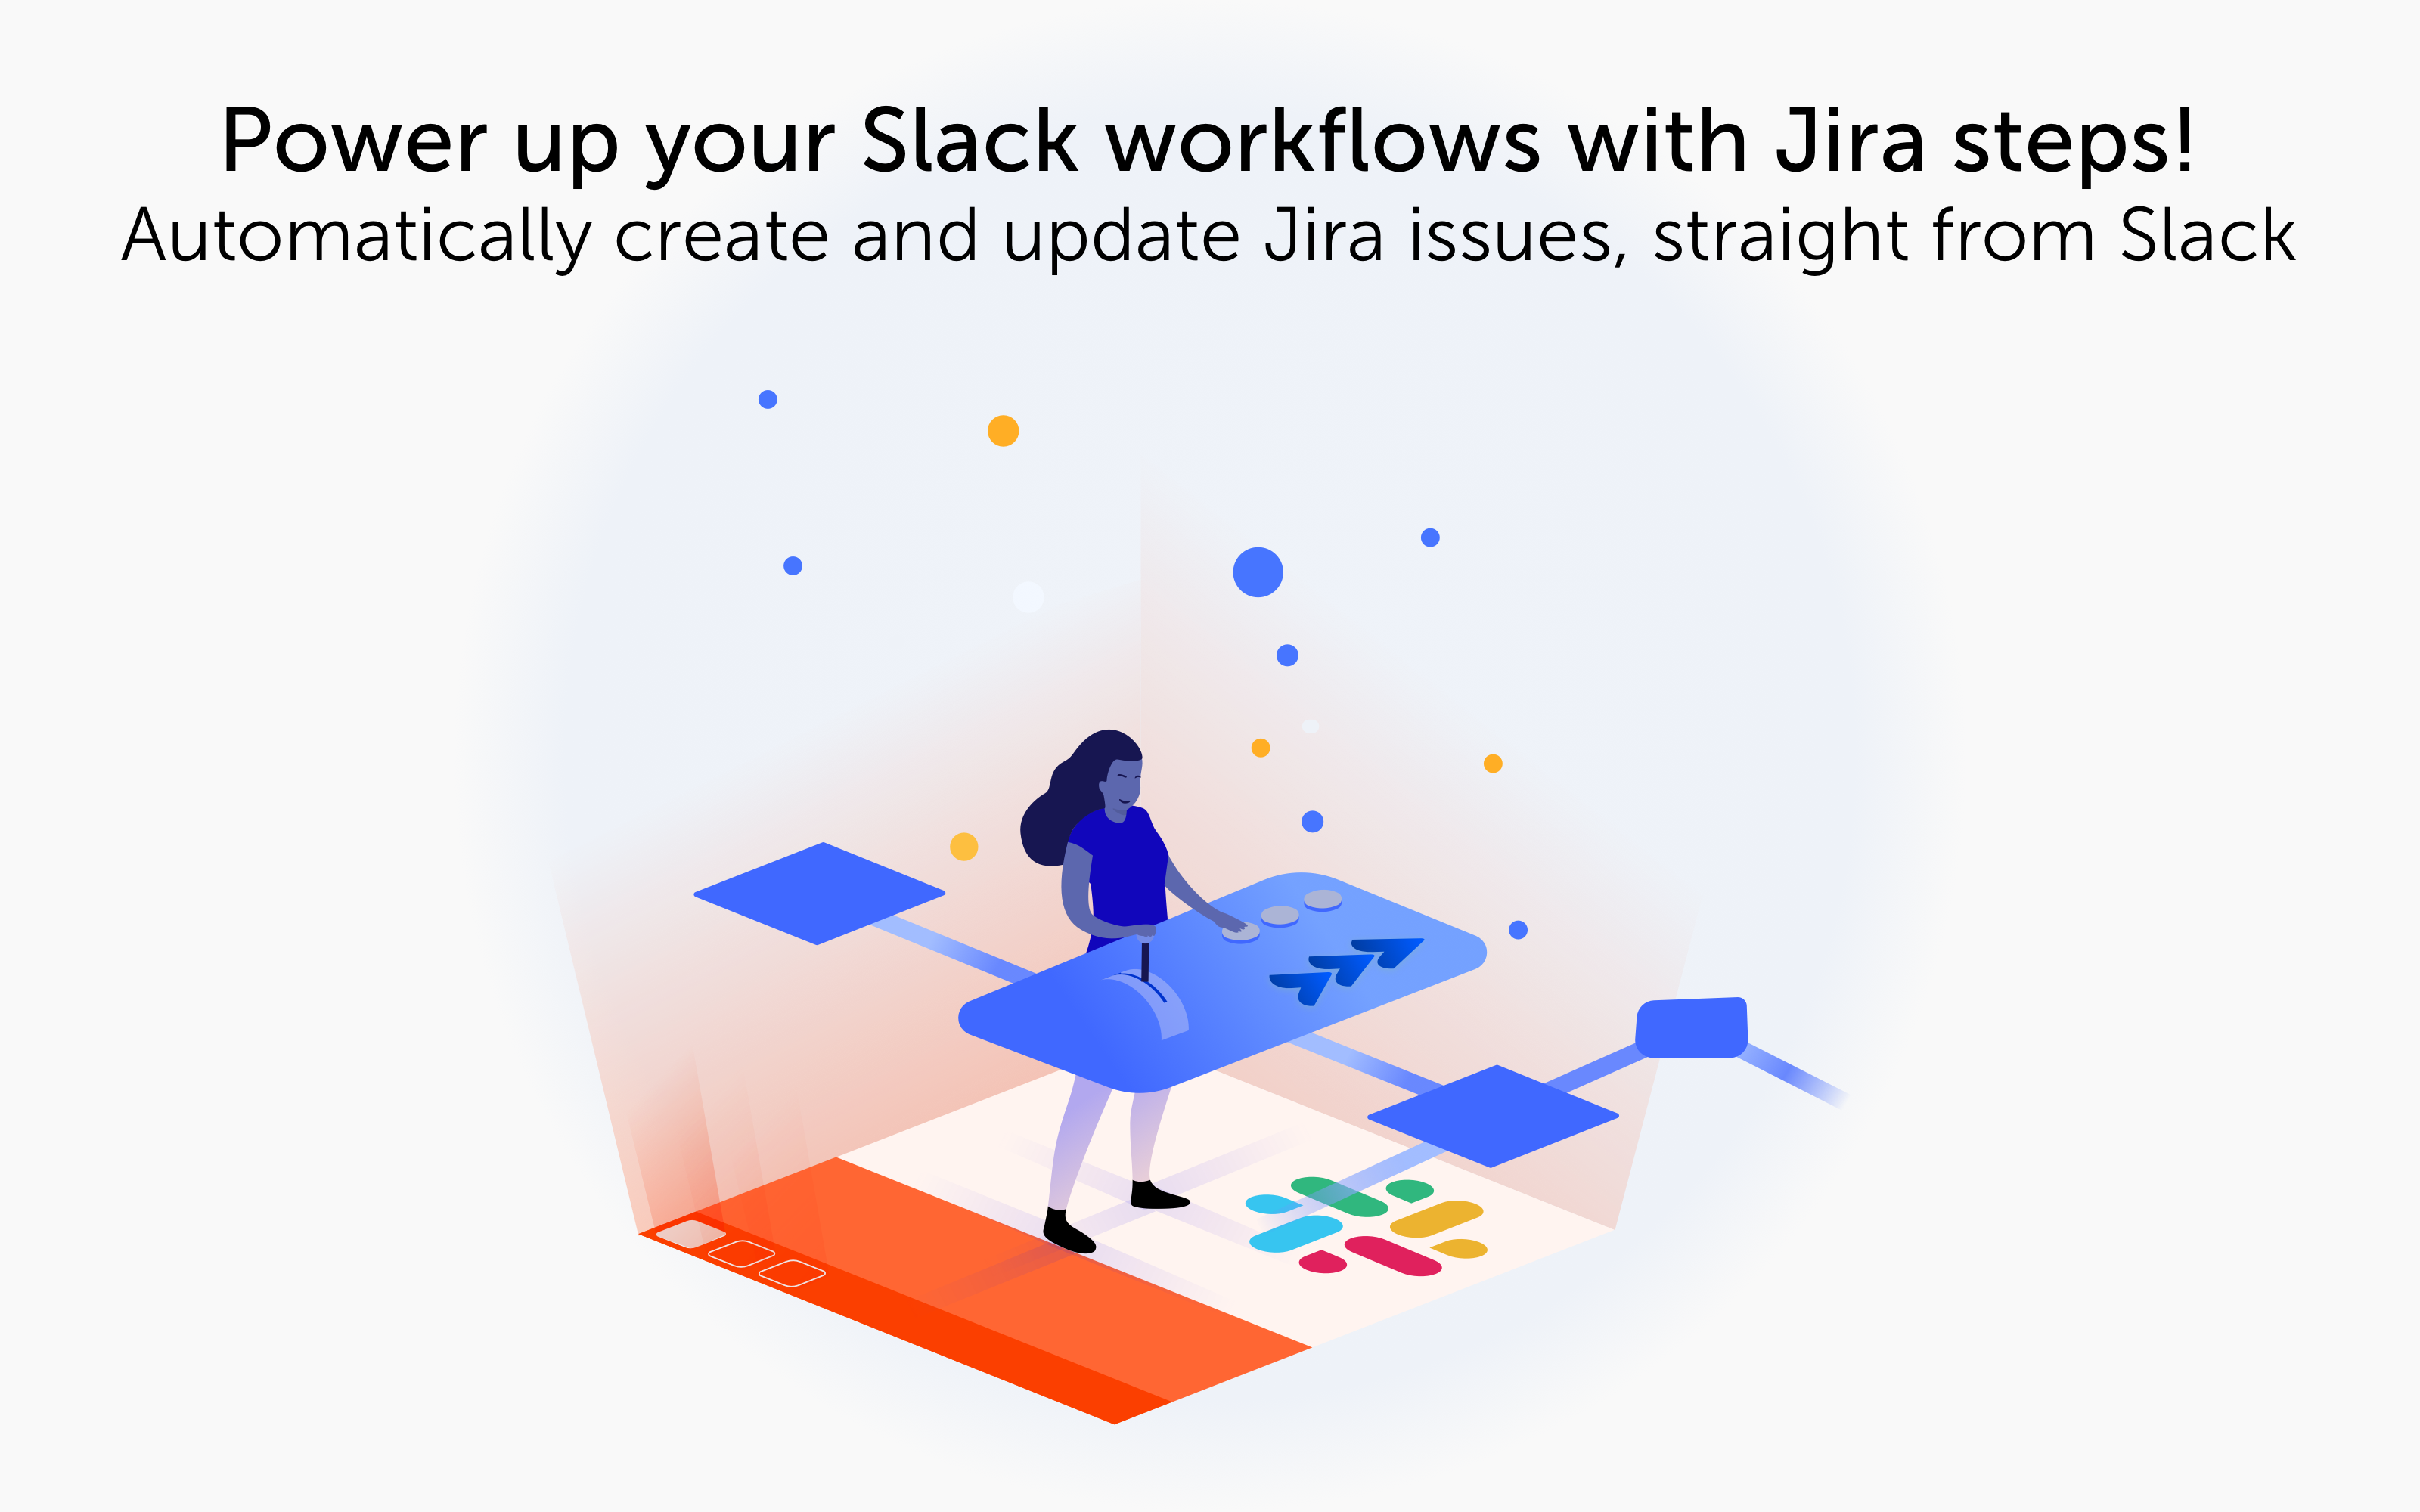 Power up your Slack workflow with Jira steps! Illustration of a lady working in Slack and interacting with a Jira workflow.